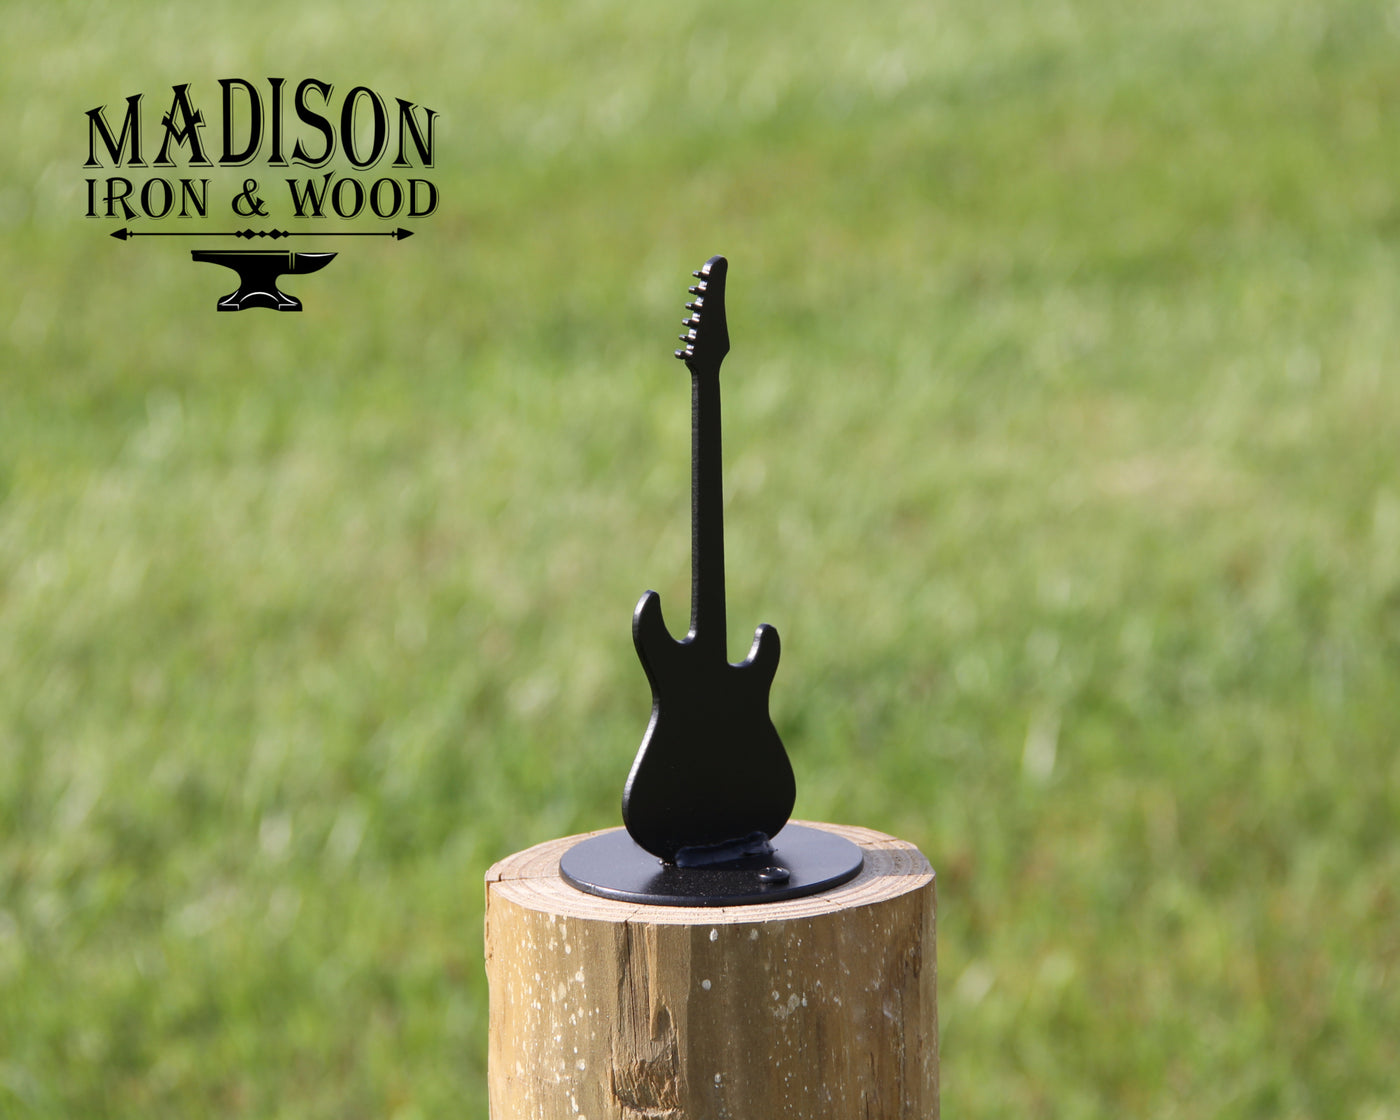 Electric Guitar Post Top For Round Wood Fence Post - Madison Iron and Wood - Post Cap - metal outdoor decor - Steel deocrations - american made products - veteran owned business products - fencing decorations - fencing supplies - custom wall decorations - personalized wall signs - steel - decorative post caps - steel post caps - metal post caps - brackets - structural brackets - home improvement - easter - easter decorations - easter gift - easter yard decor